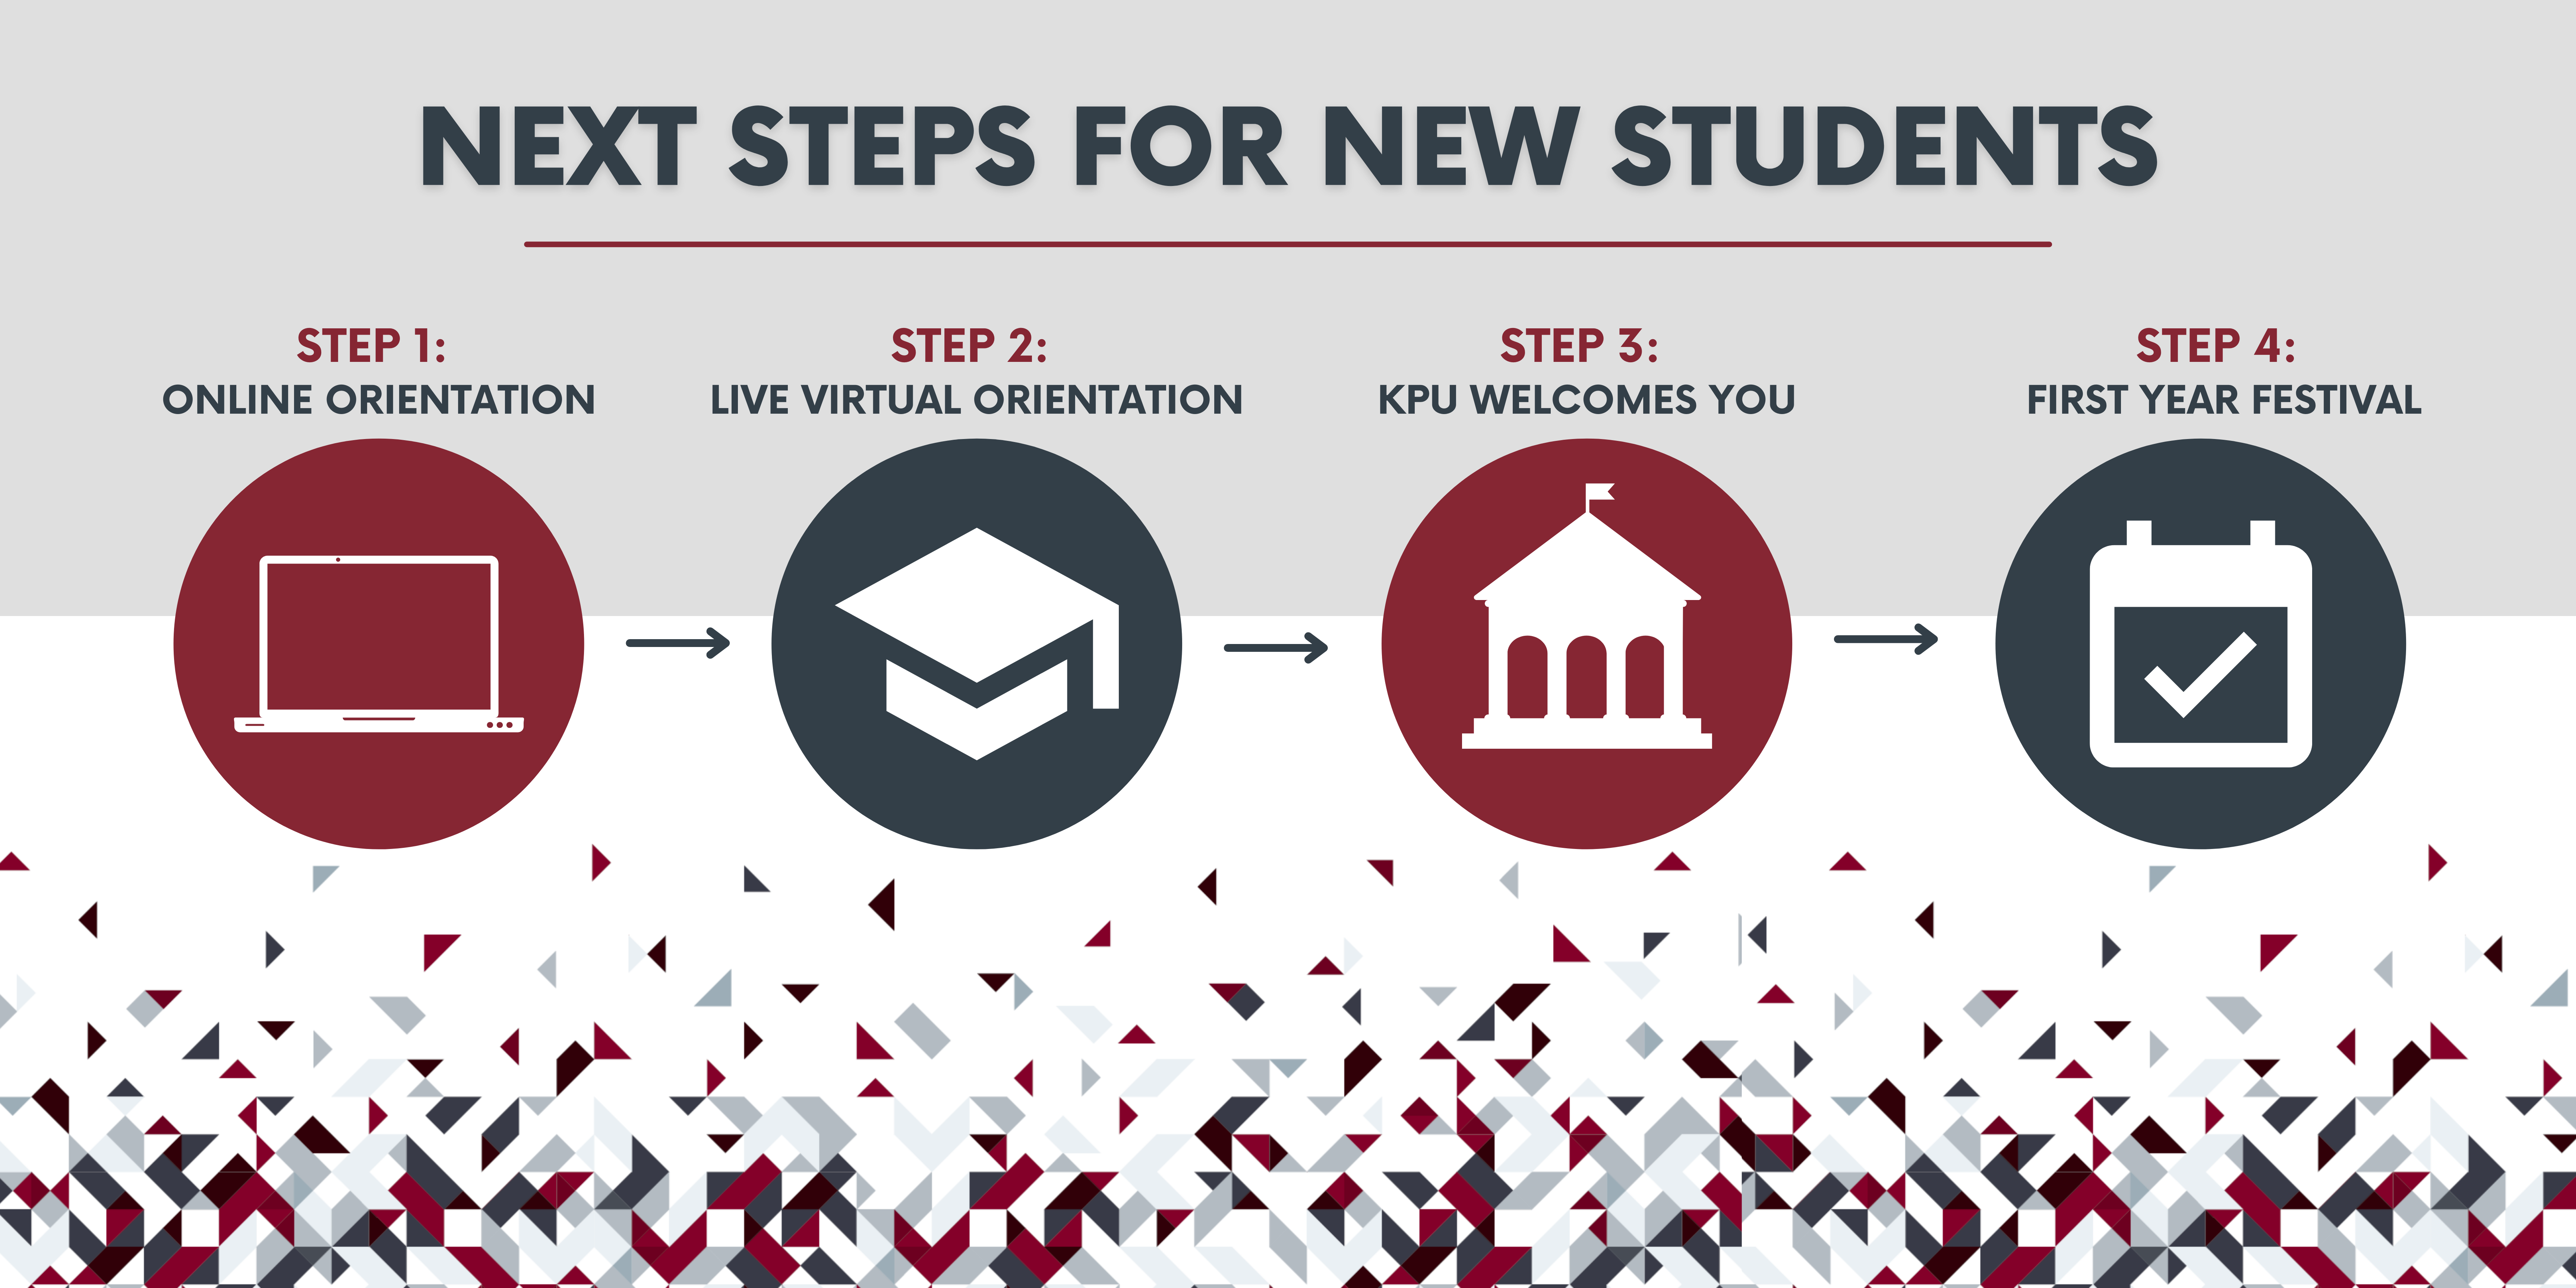 Next Steps for New Students